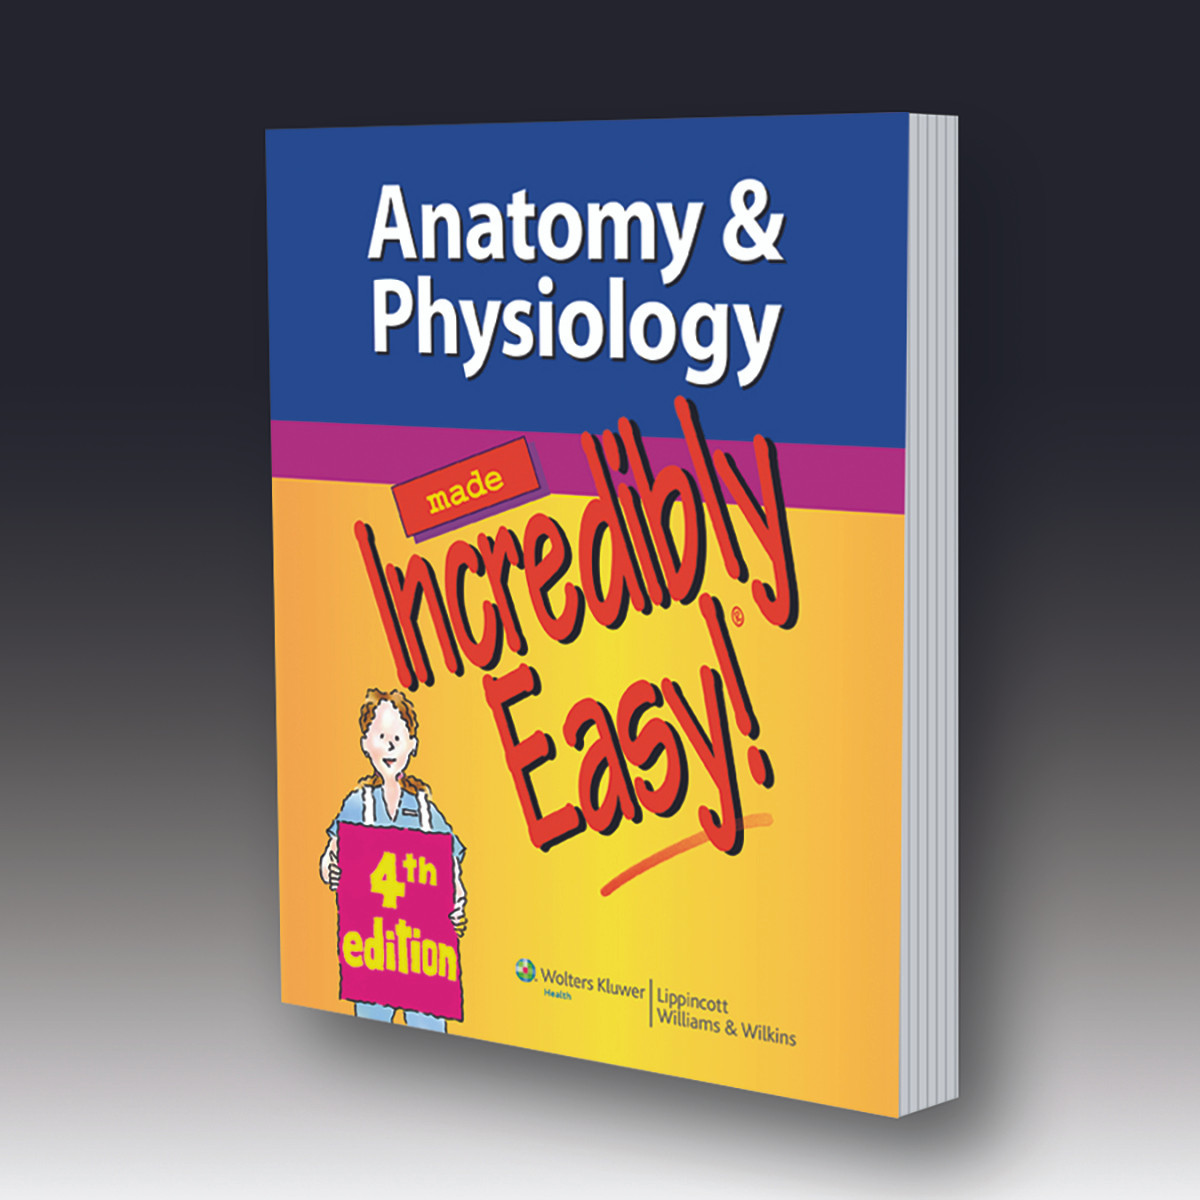 Book - Anatomy & Physiology Made Incredibly Easy - Biologyproducts.com